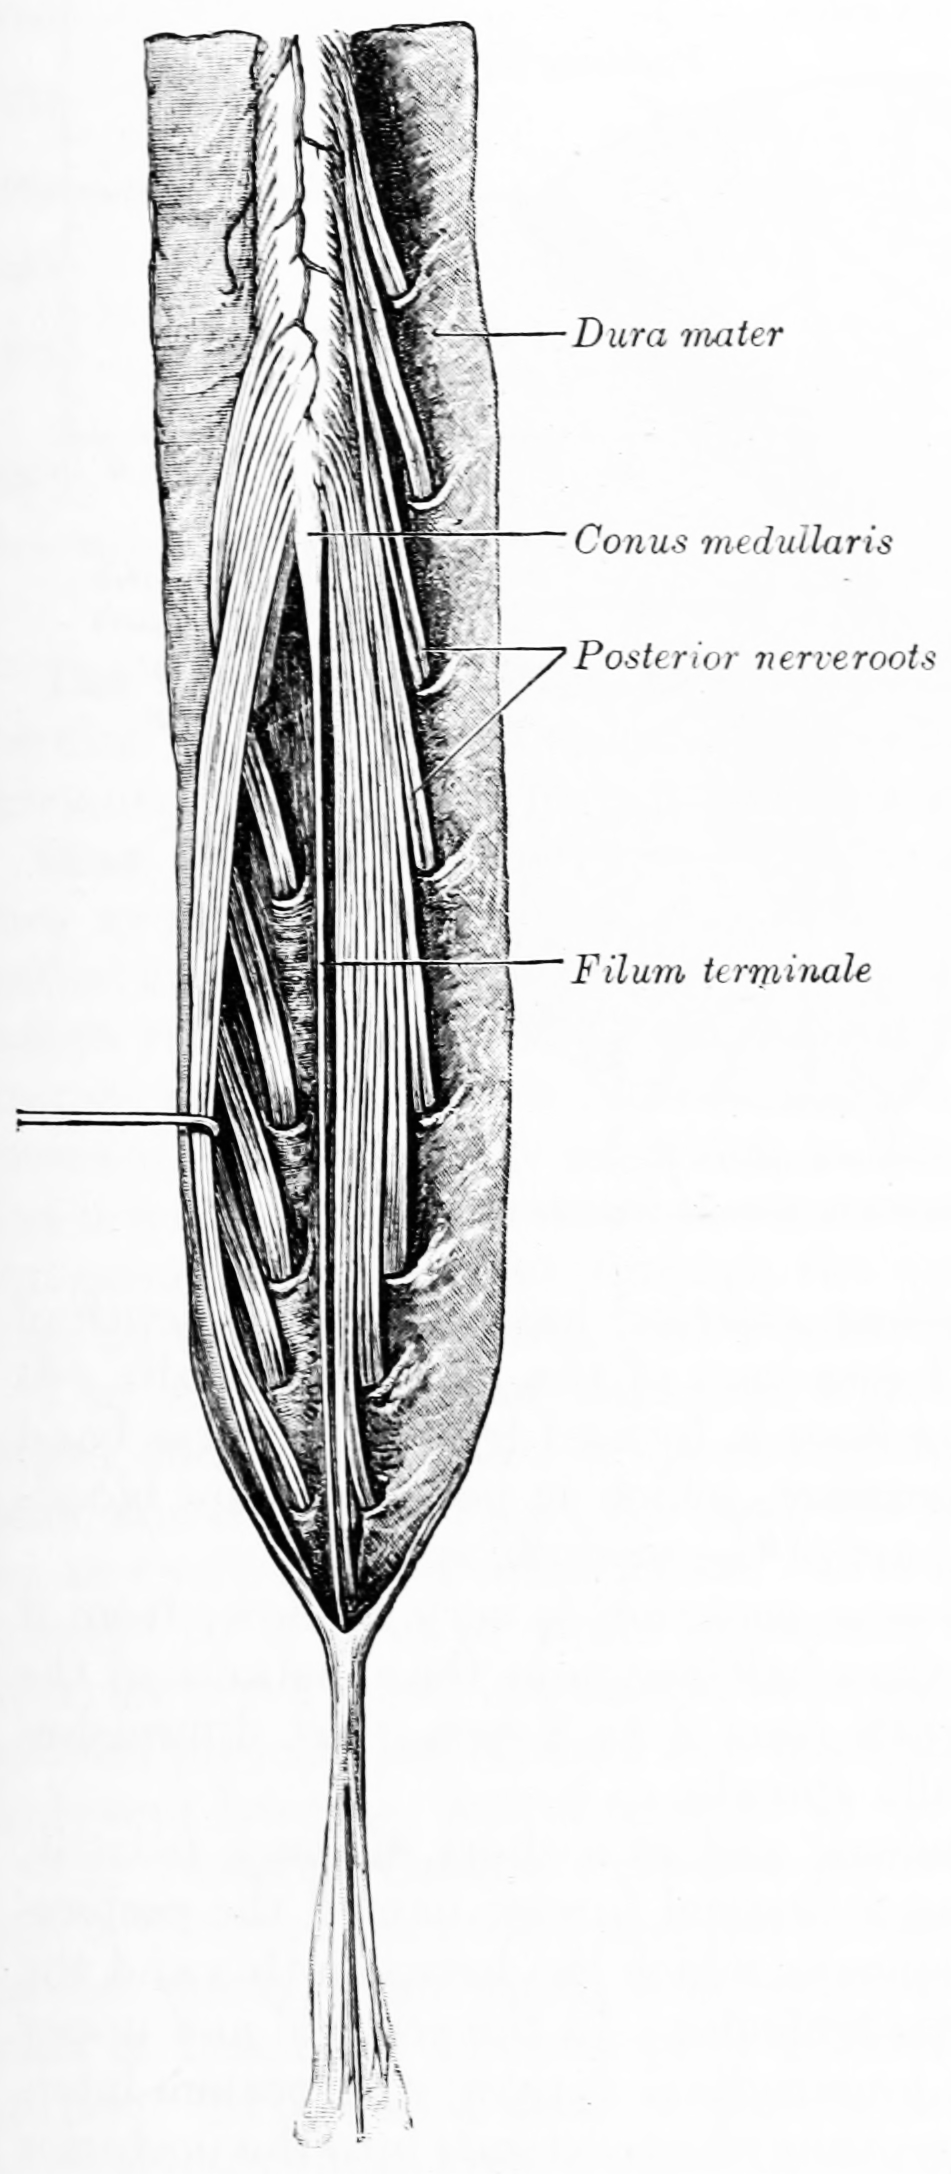 Cauda equina and filum terminale seen from behind. The dura mater has been opened and spread out, and the arachnoid has been removed. From Gray Henry, Anatomy of the Human Body. 20th Edition, Lea & Febiger, Philadelphia & New York, 1918